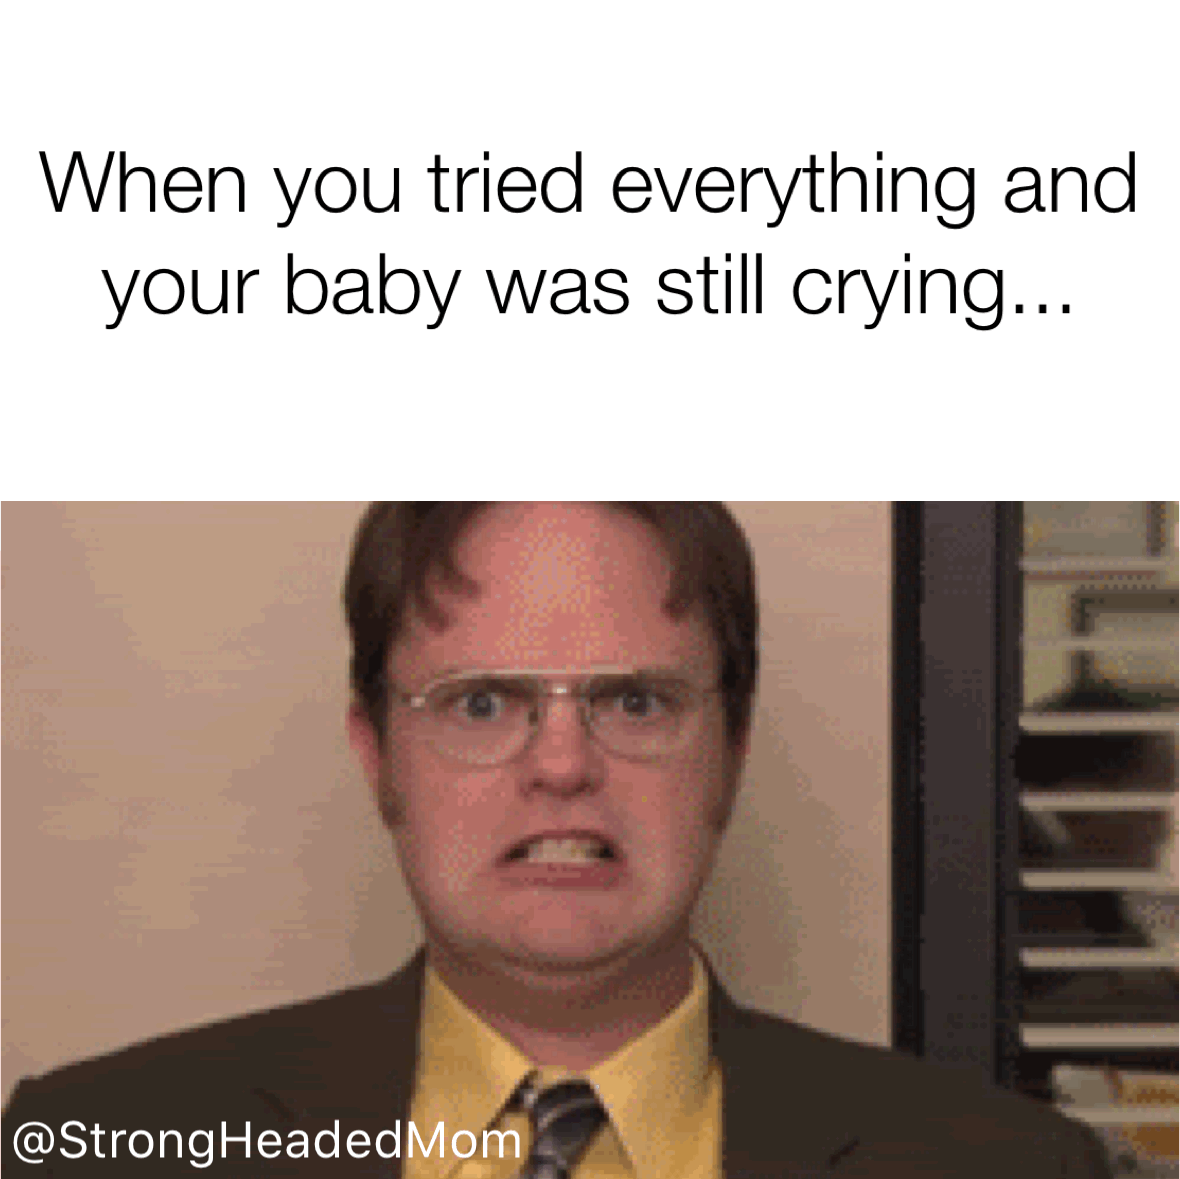 stage two angry about crying baby